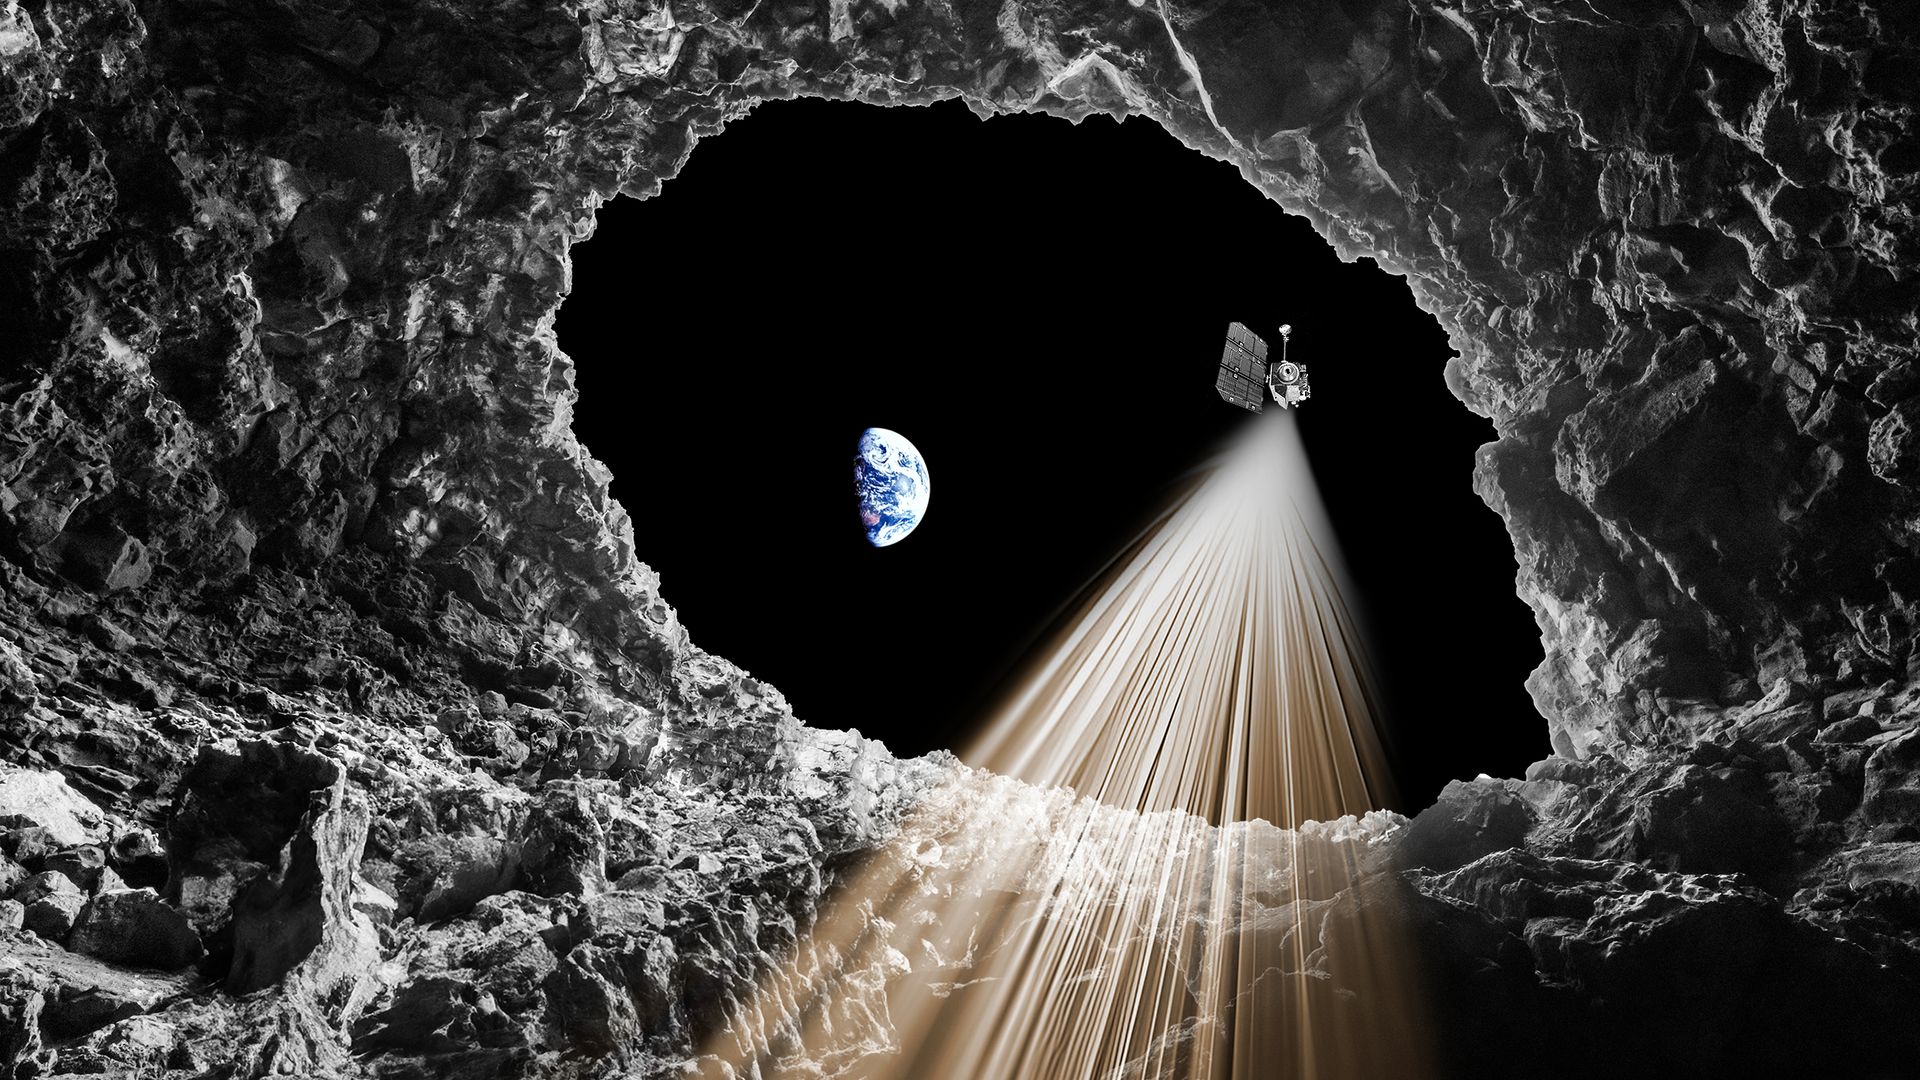 Moon cave 'could be base' for future astronauts